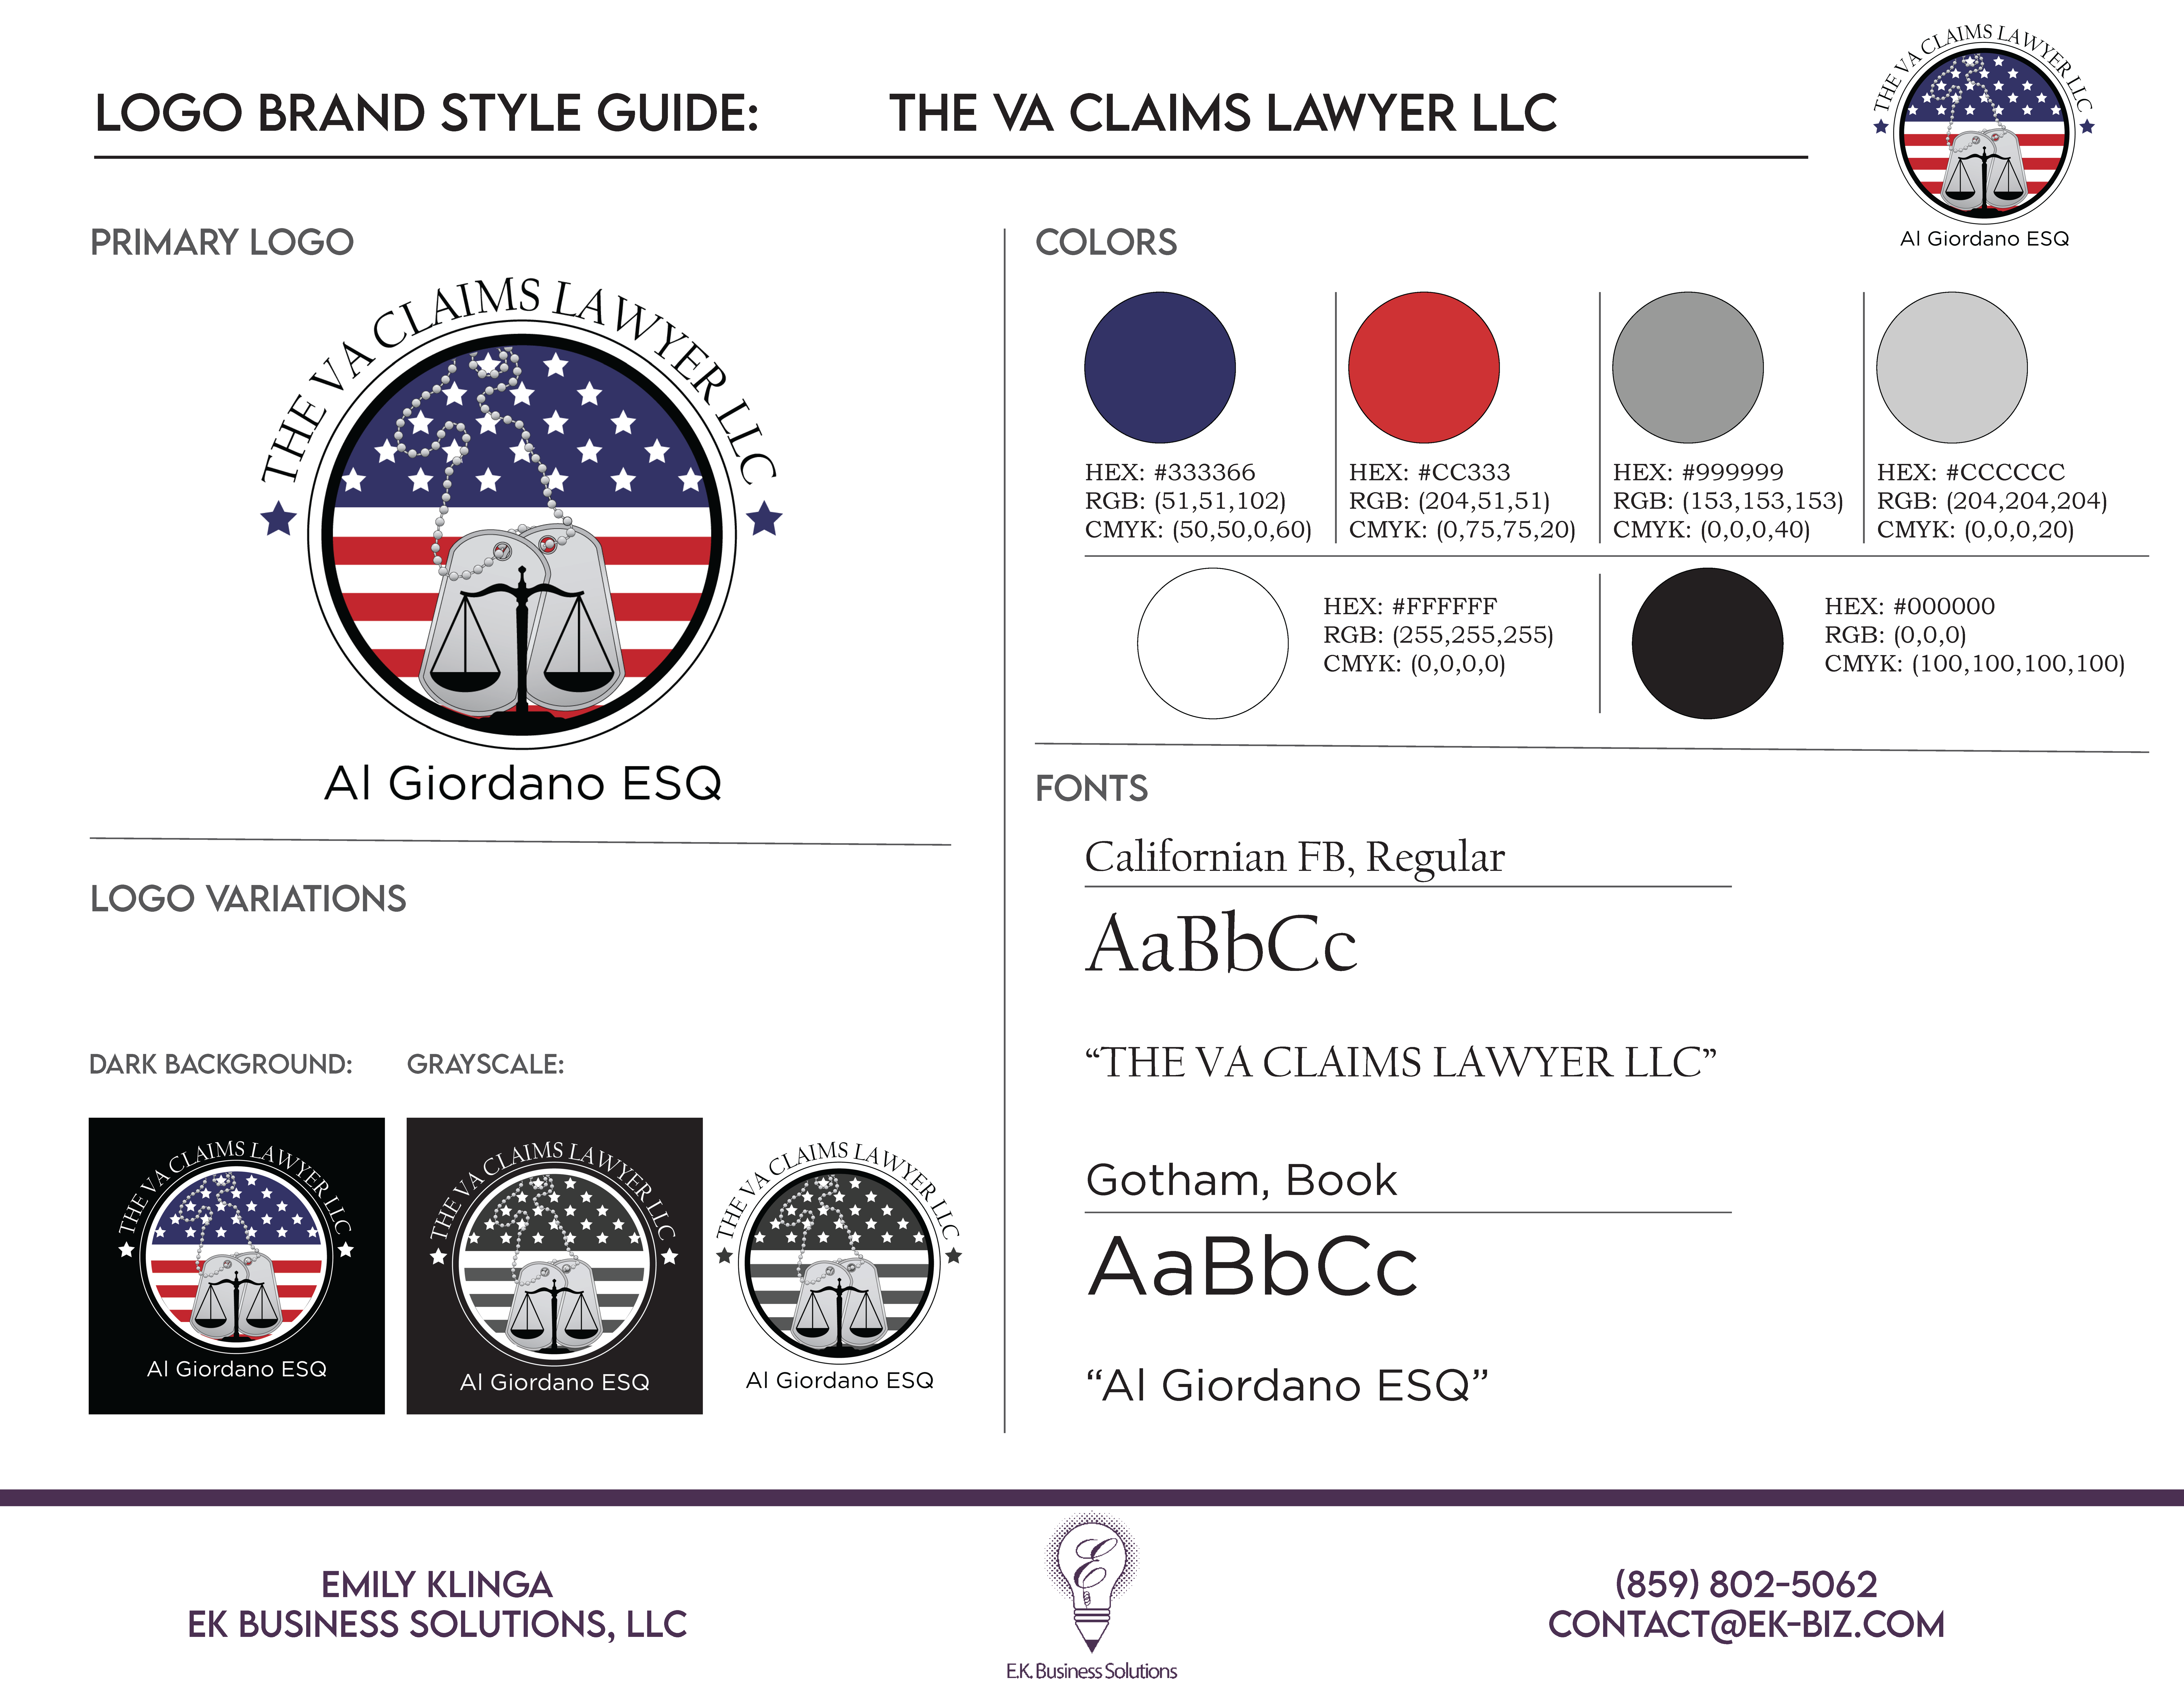 The VA Claims Lawyer Brand Style Guide